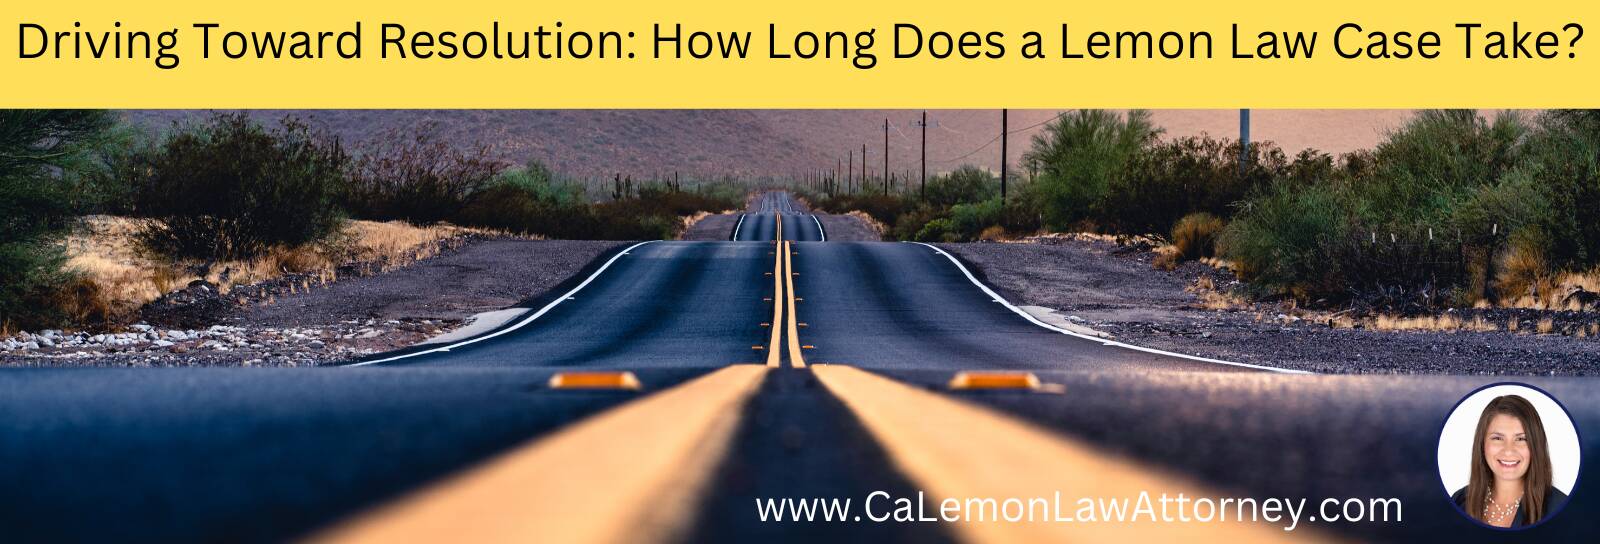 Driving Toward Resolution: Lemon Law Timing – How Long Does It Take?